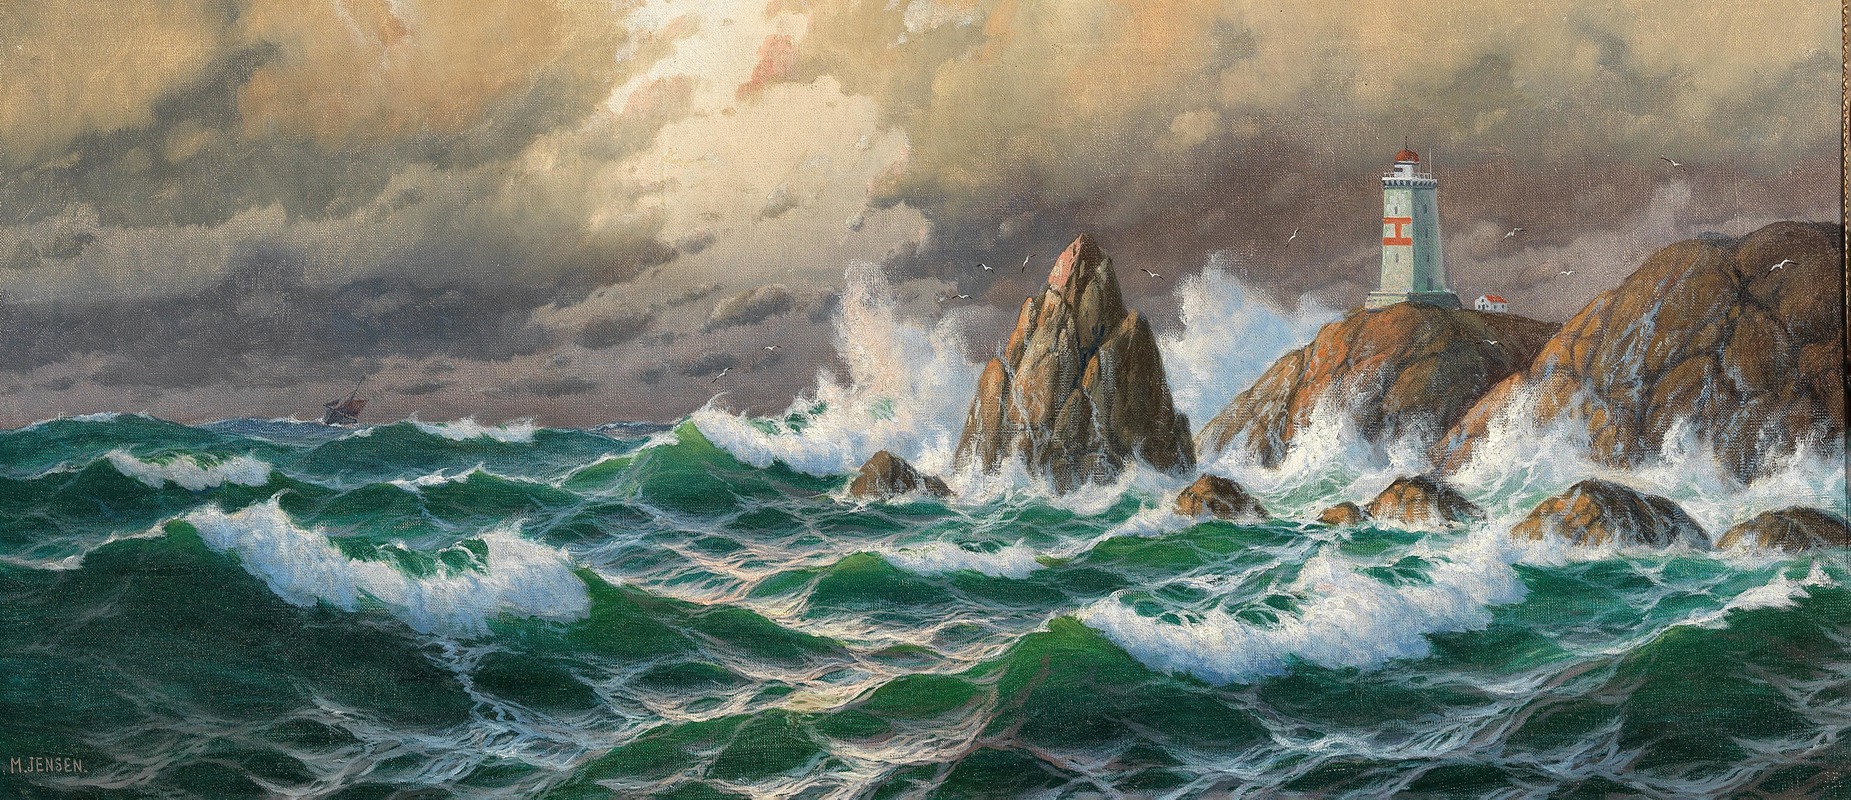 Max Jensen - Breaking Waves with Lighthouse in Stormy Weather